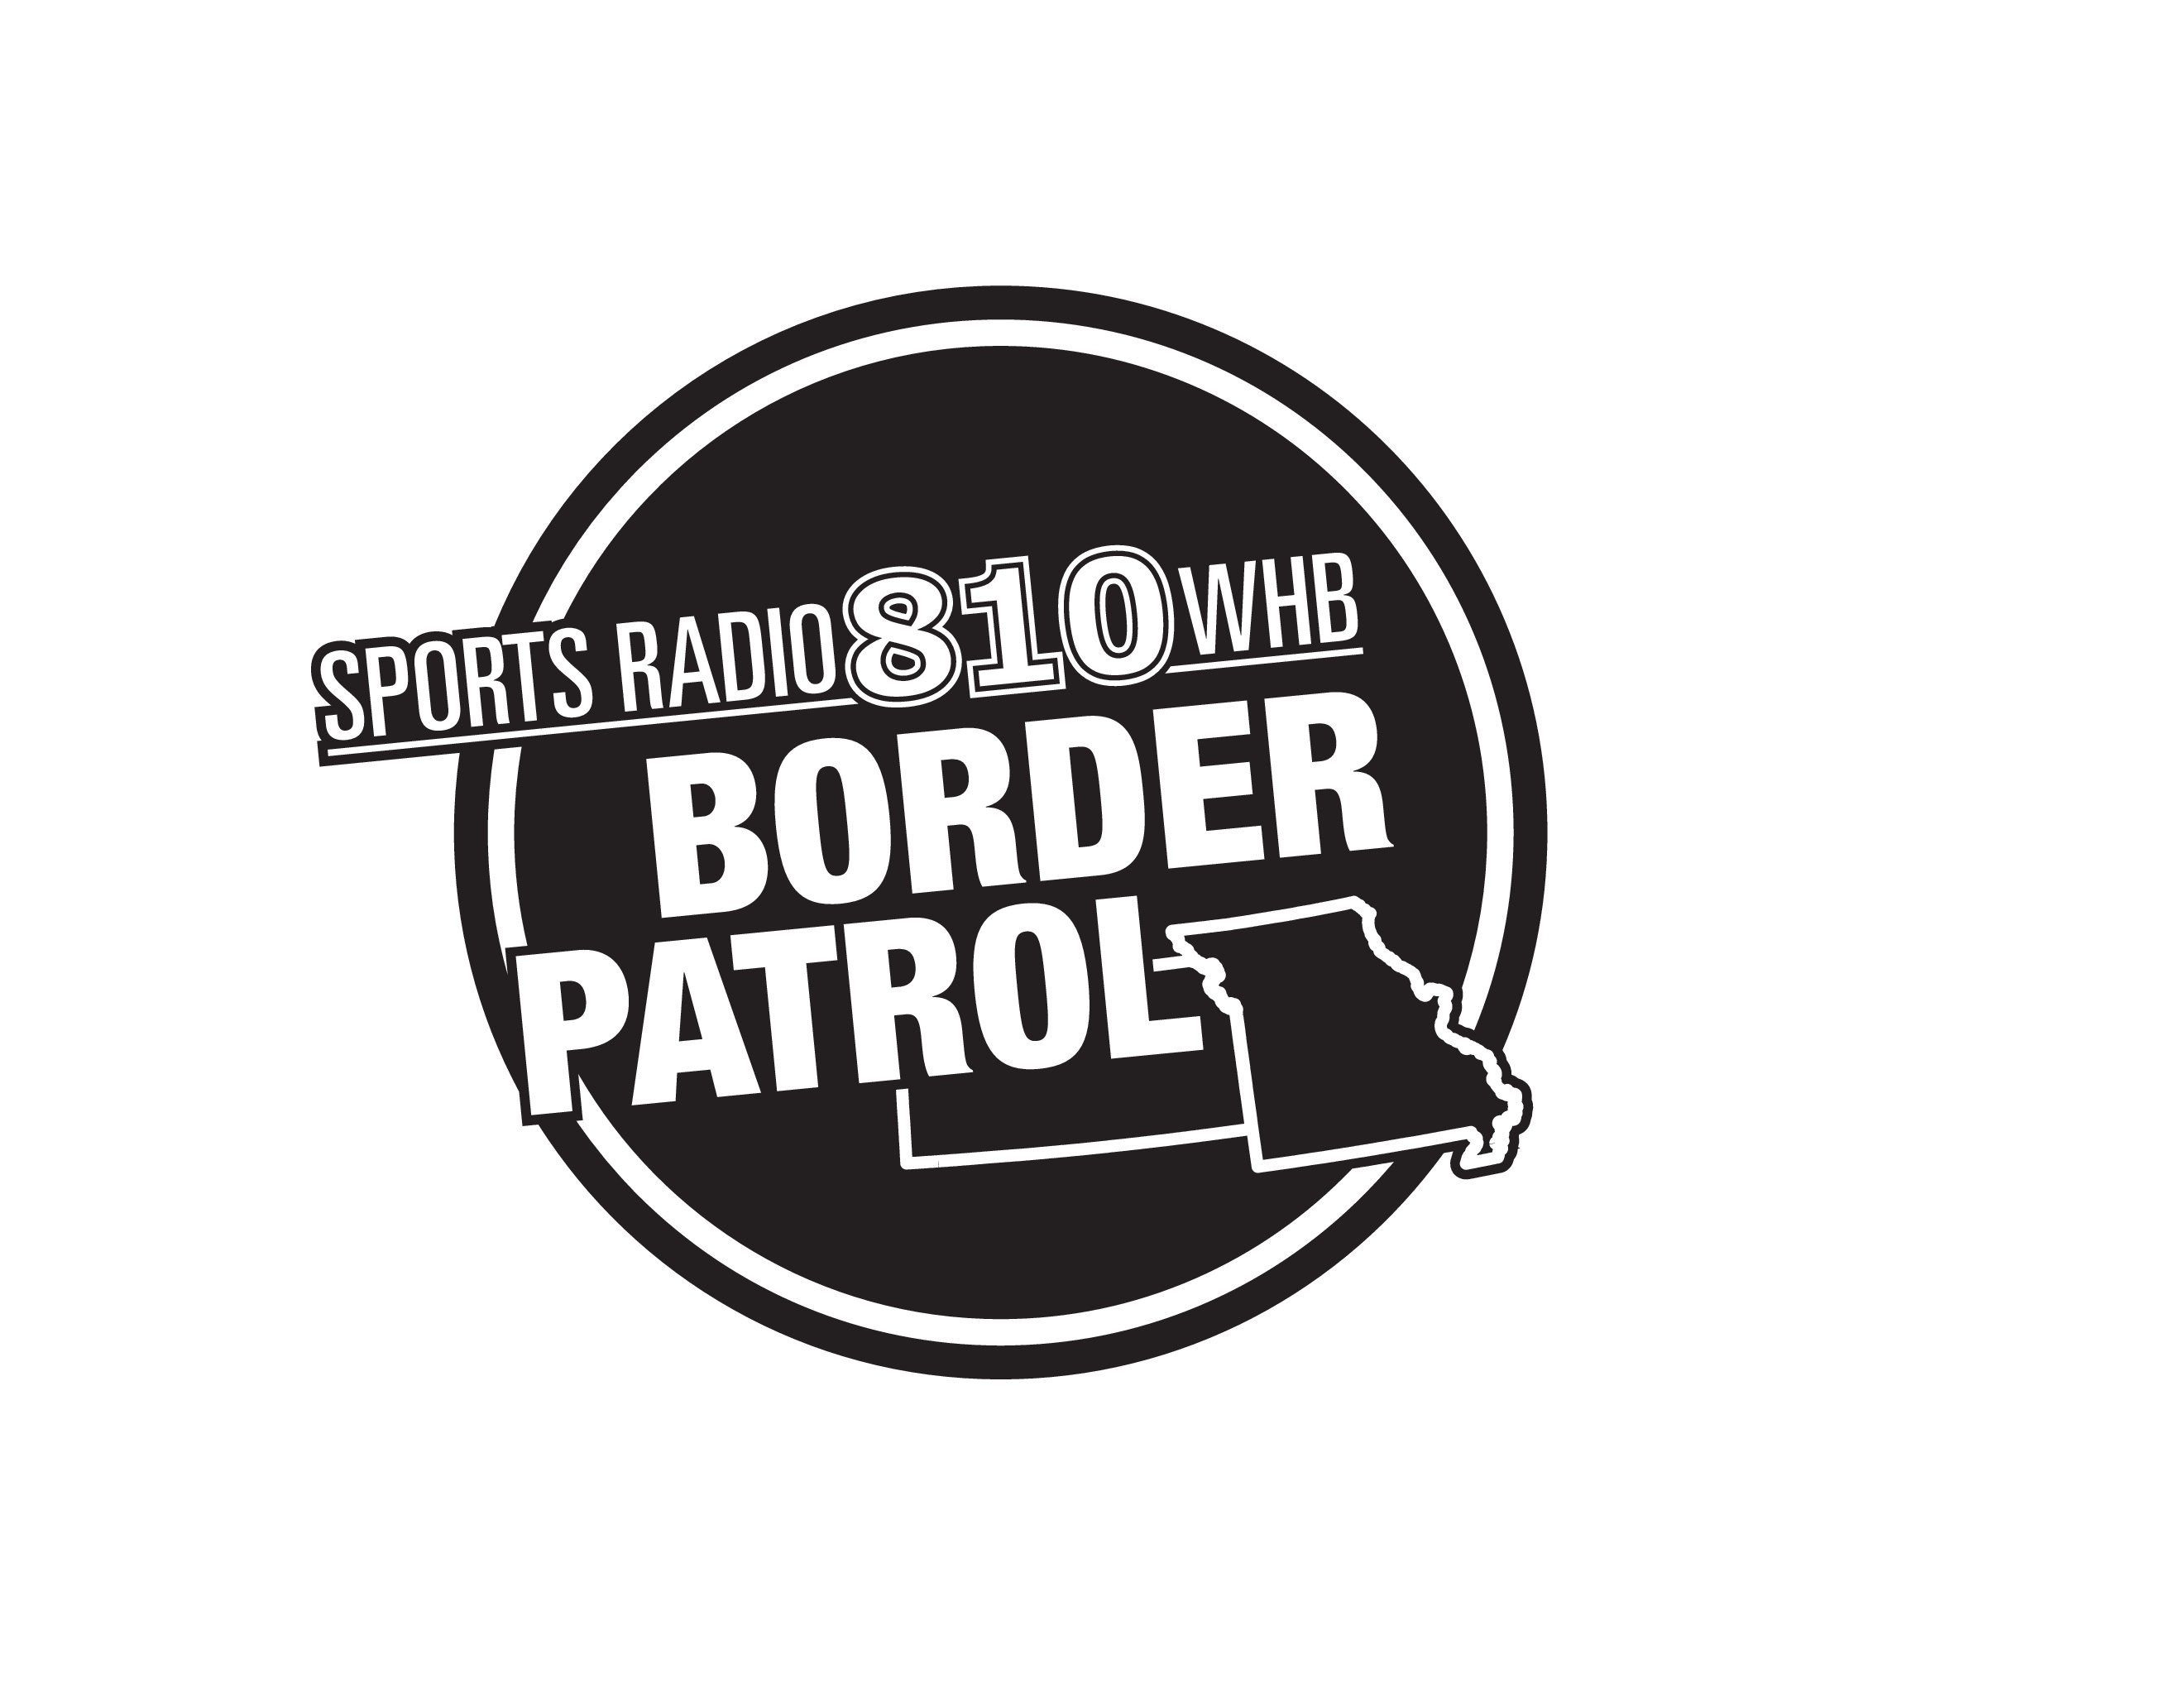 10-3-22 HR 1 of The Border Patrol on 38 The Spot